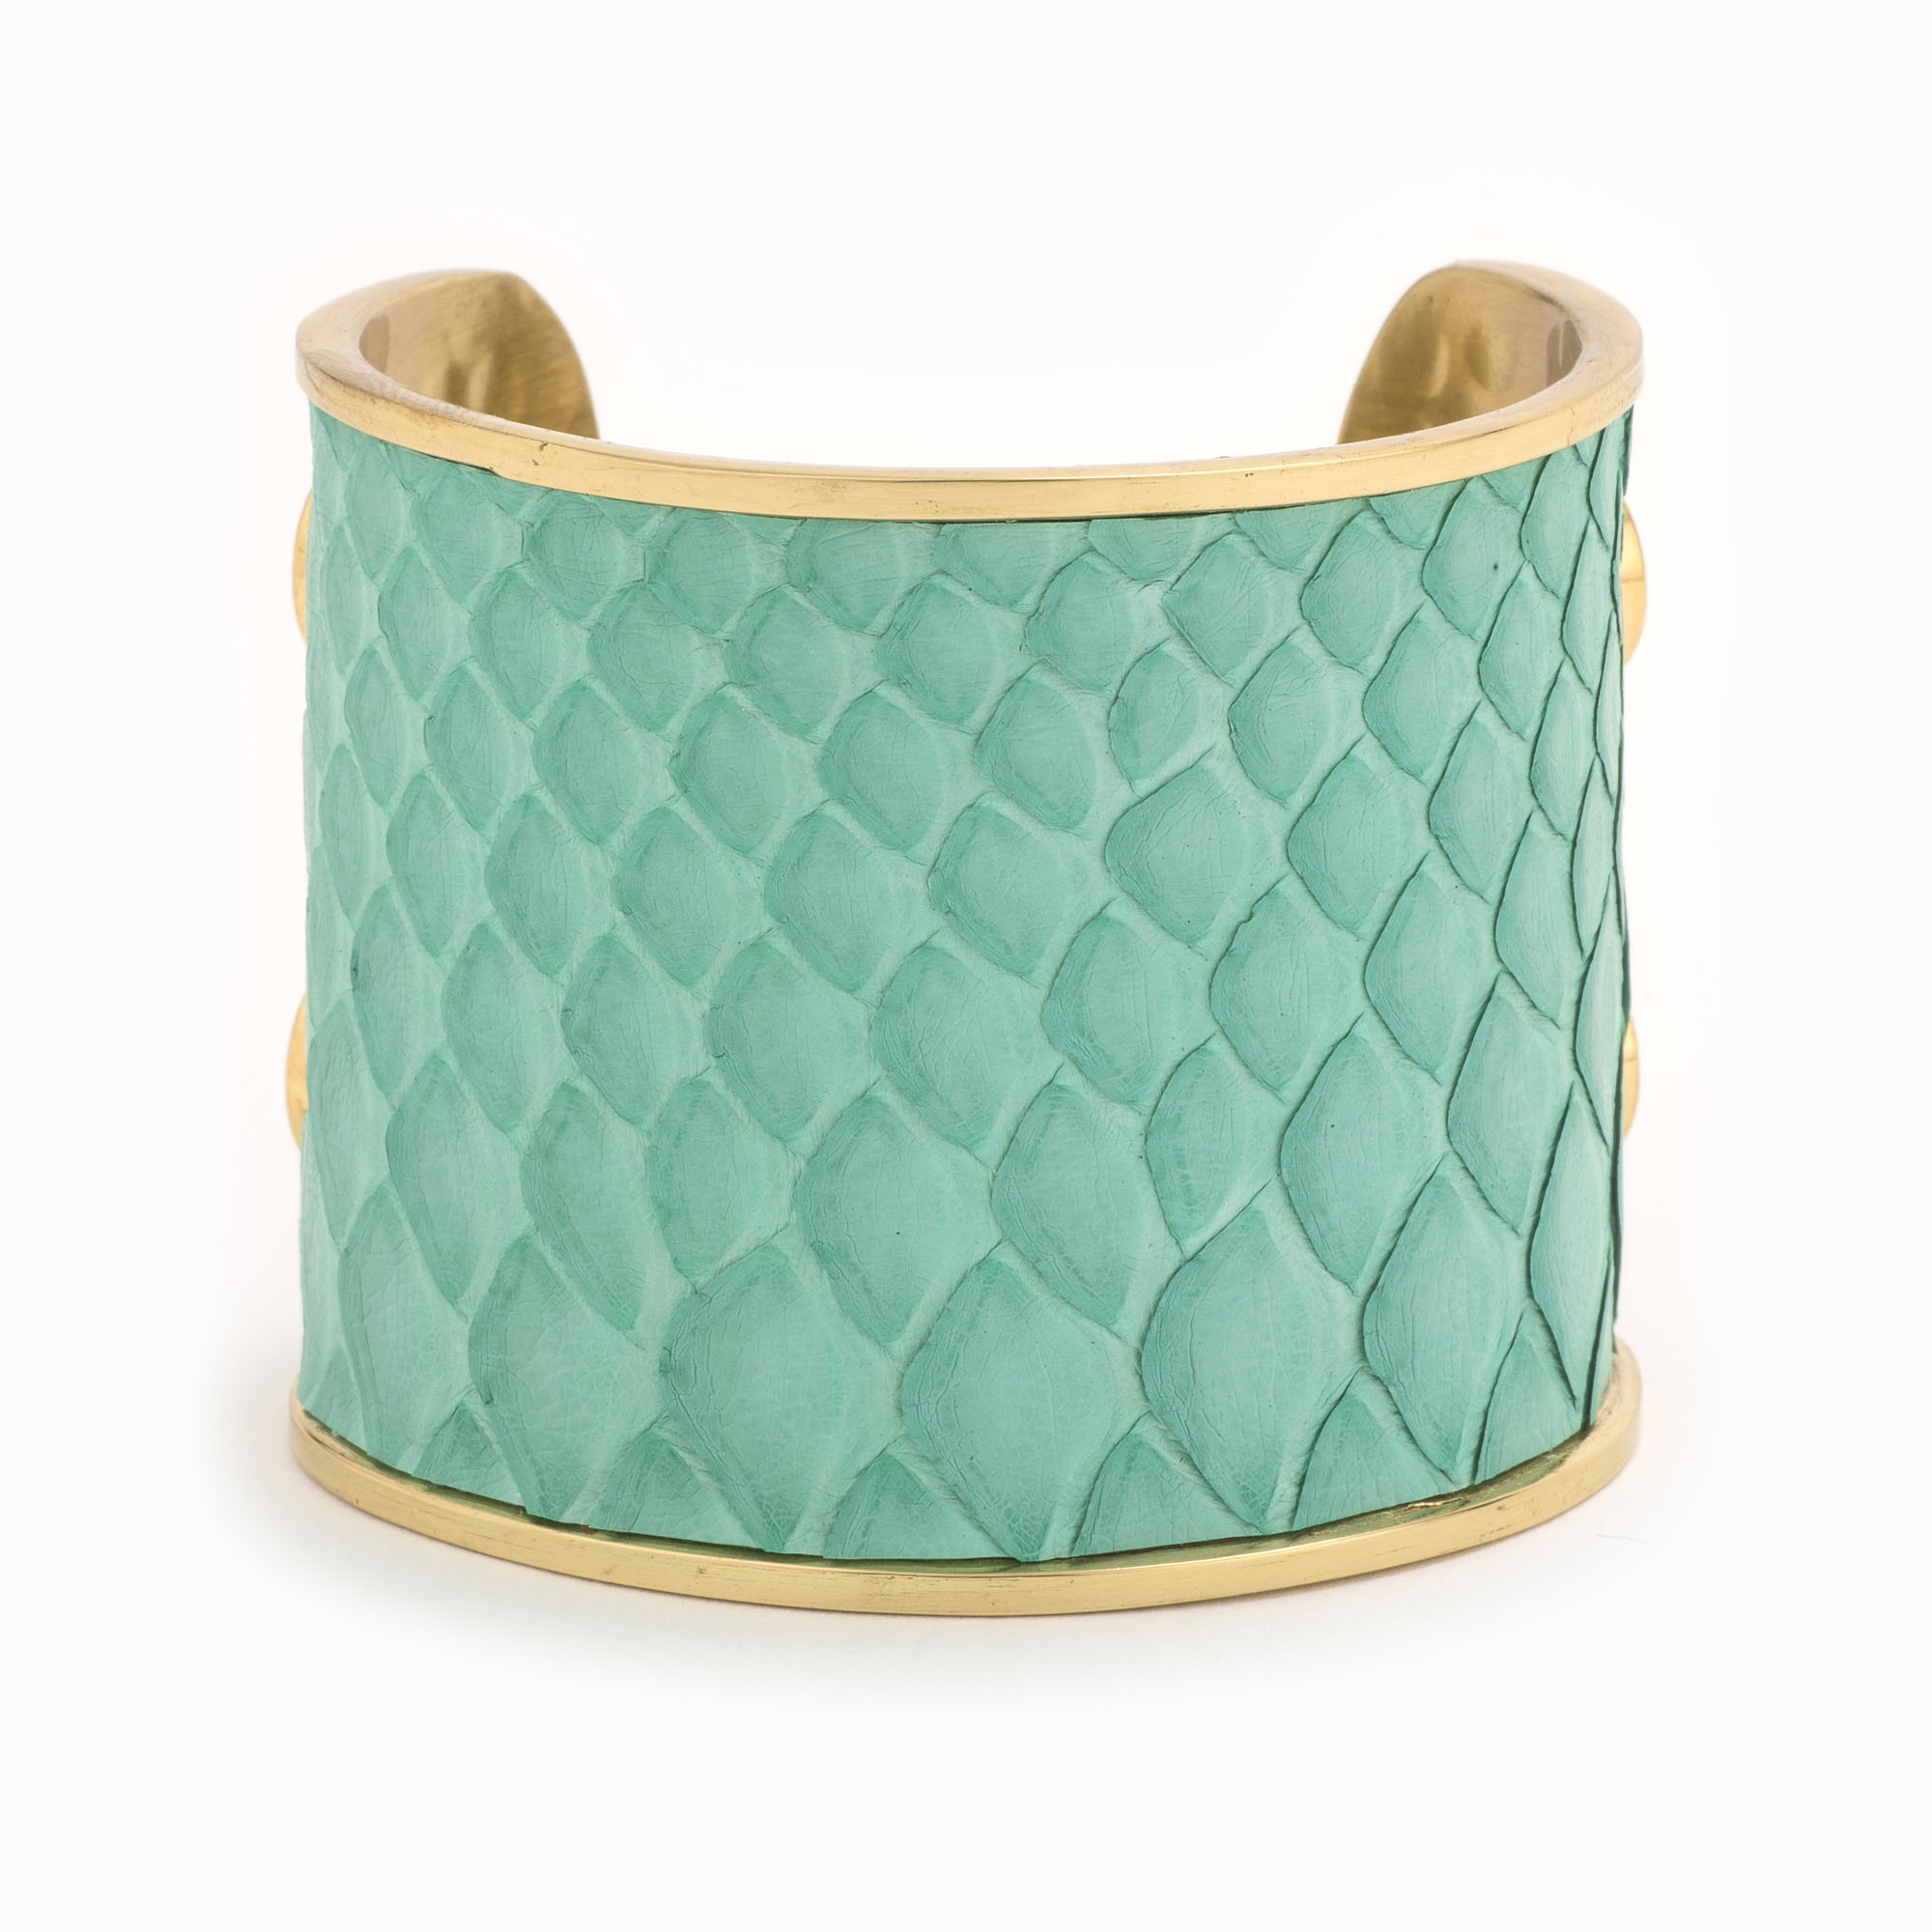 A large gold cuff with turquoise colored snakeskin pattern inlaid.